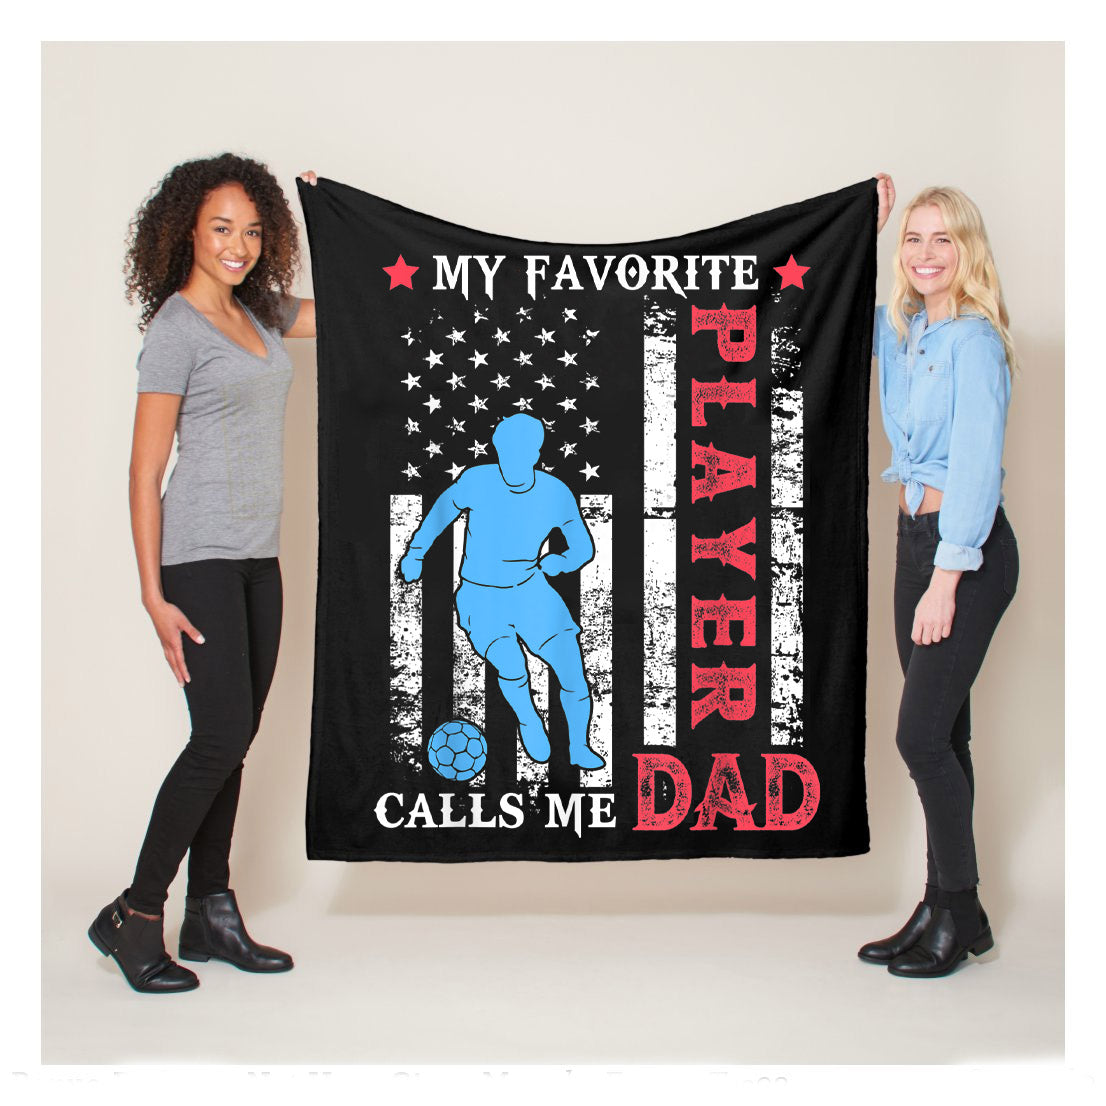 My Favorite Soccer Player Calls Me Dad Funny Father Day Gift Fleece Blanket,  Soccer Blankets, Soccer Gifts, Happy Fathers Day Gift Ideas For Dad